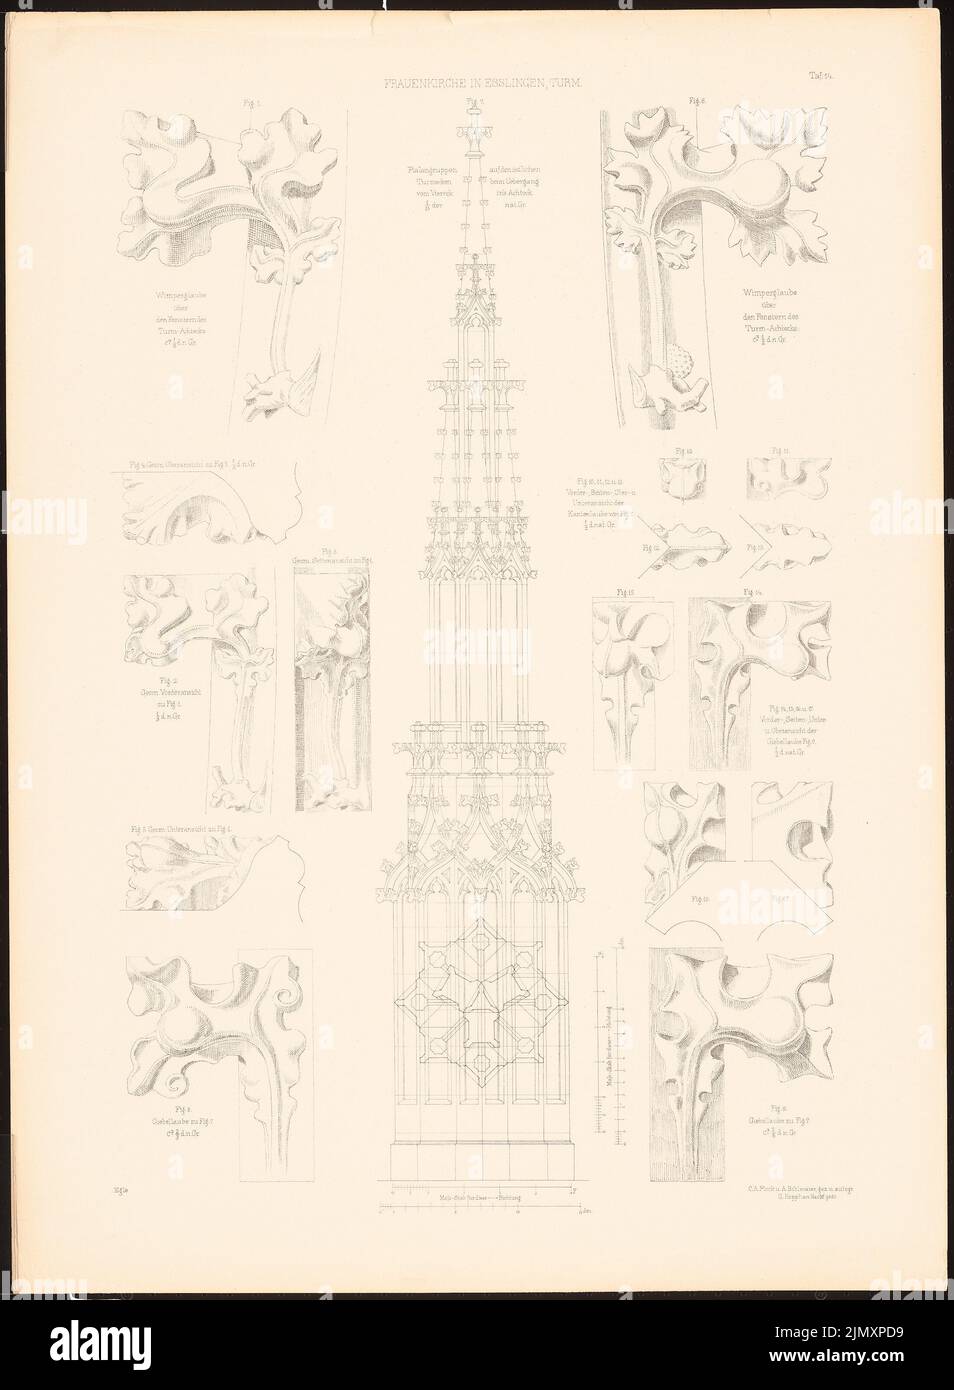 Egle Joseph von (1818-1899), Frauenkirche in Esslingen (1898-1898): View, details of the fibers of the tower. Pressure on paper, 70.8 x 52 cm (including scan edges) Stock Photo